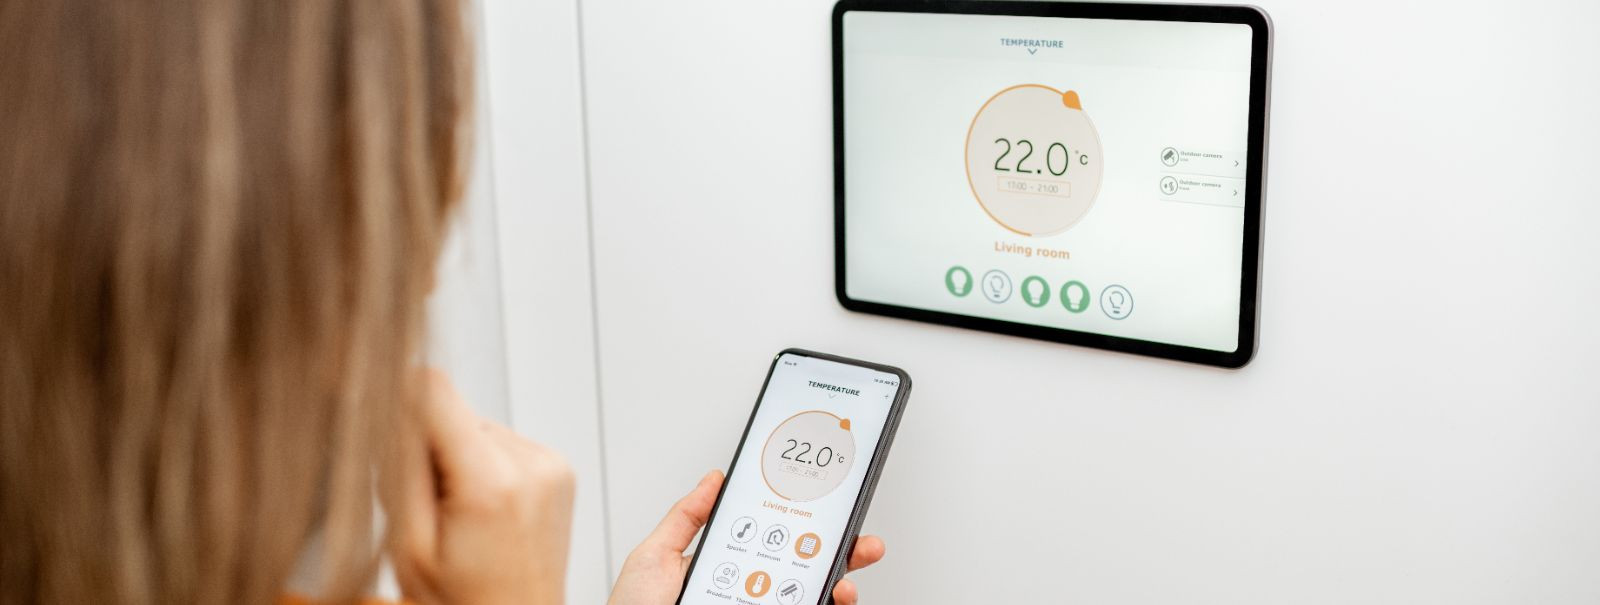 Smart thermostats are advanced devices that manage your home's heating and cooling systems more efficiently than traditional thermostats. They learn from your b